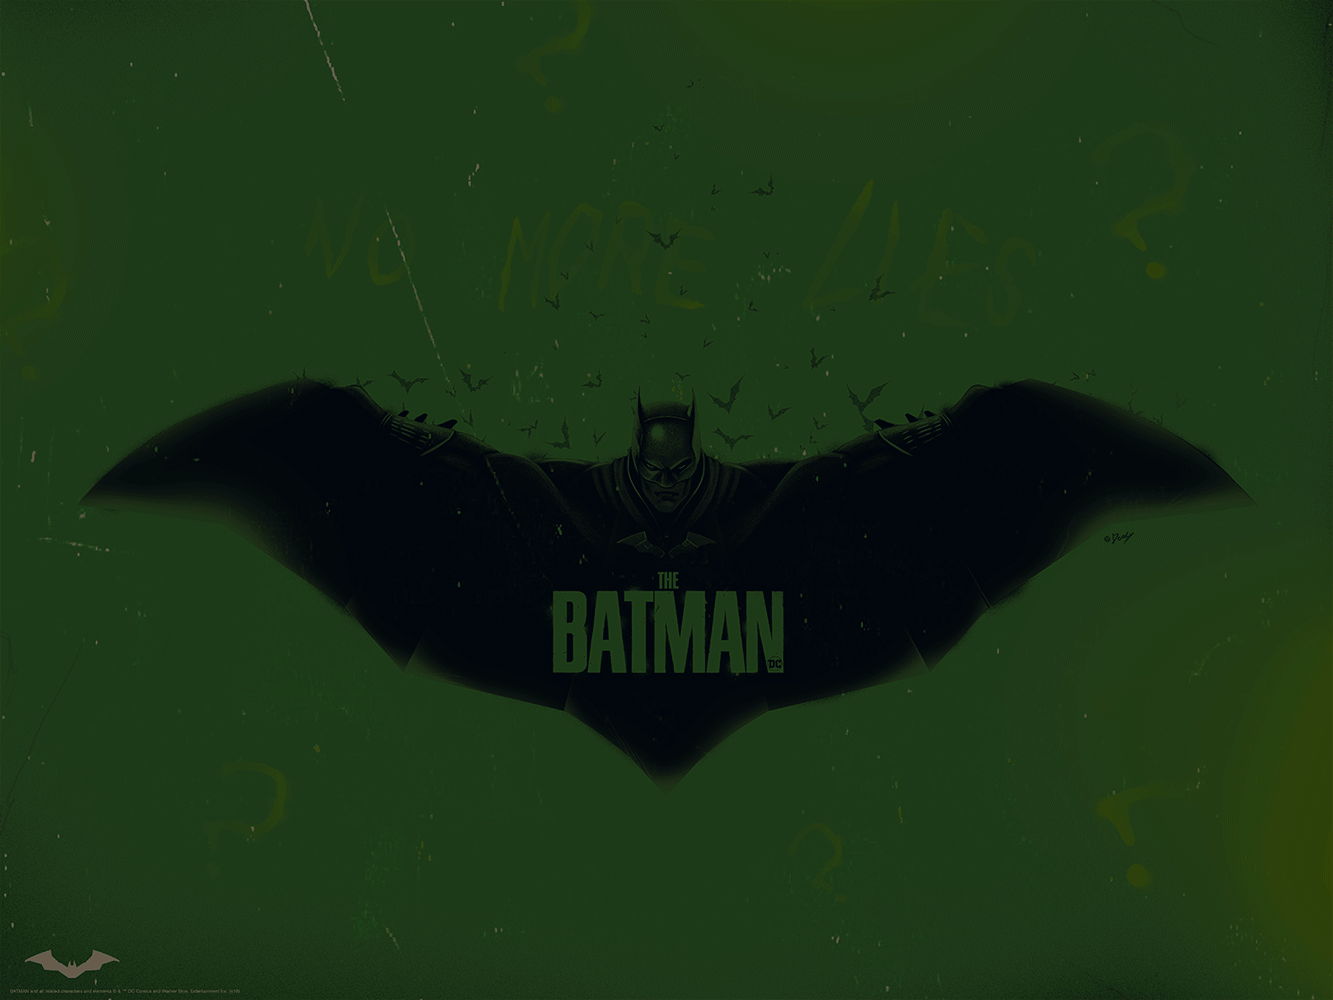 Doaly "The Batman" Green Edition